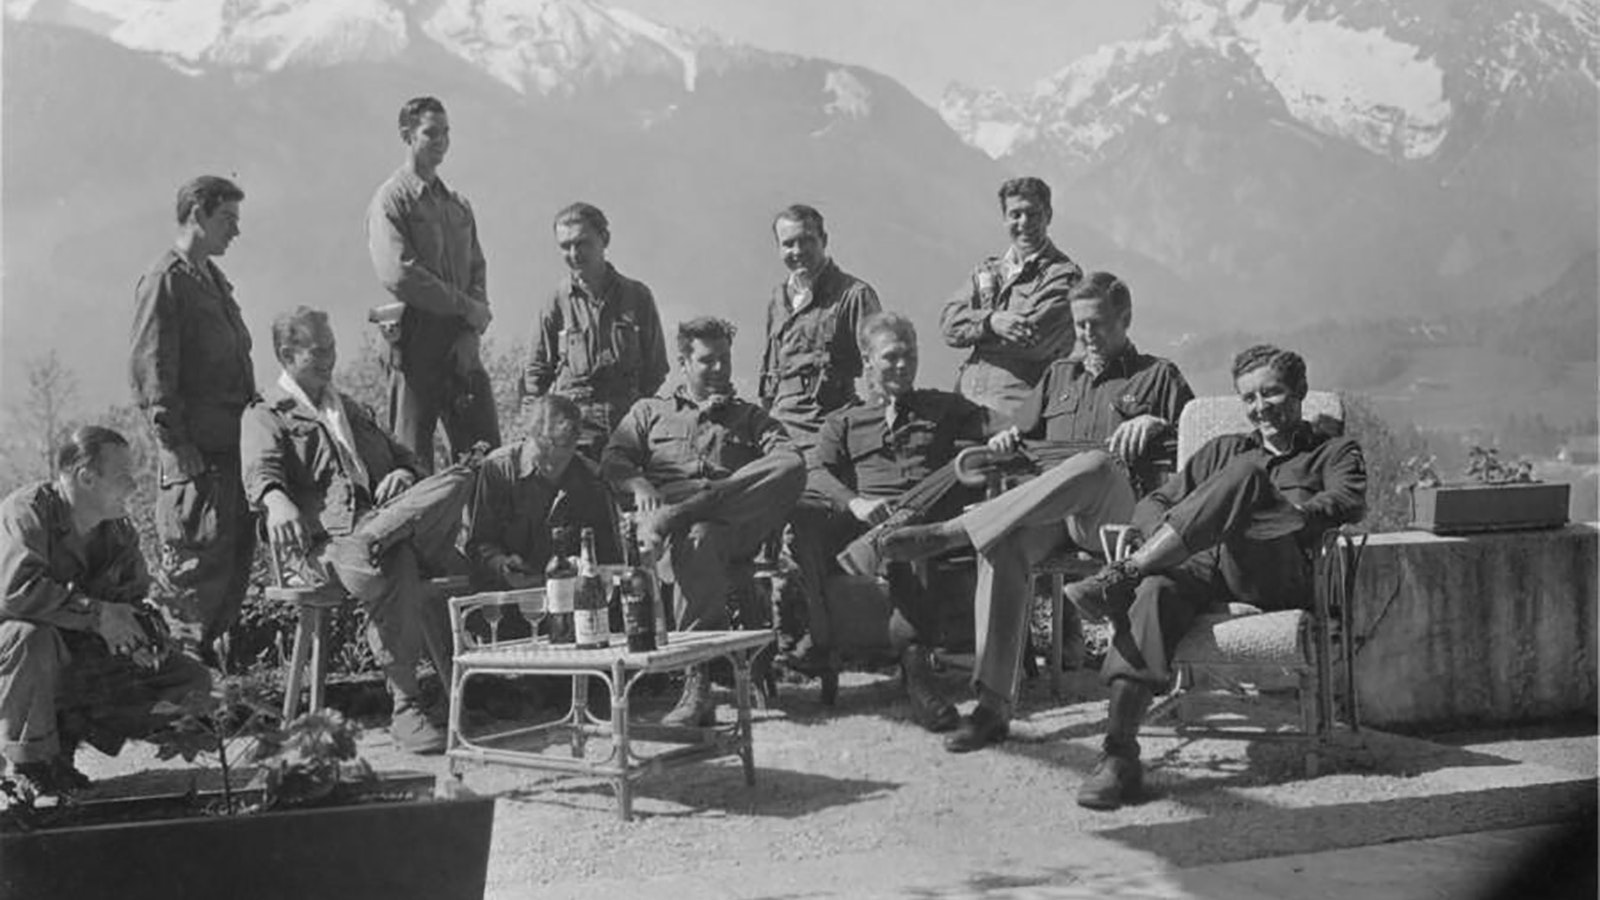 Members of the famous Easy Company in World War II post for a photo on the patio of Adolph Hitler's Eagle's Next after liberating it.